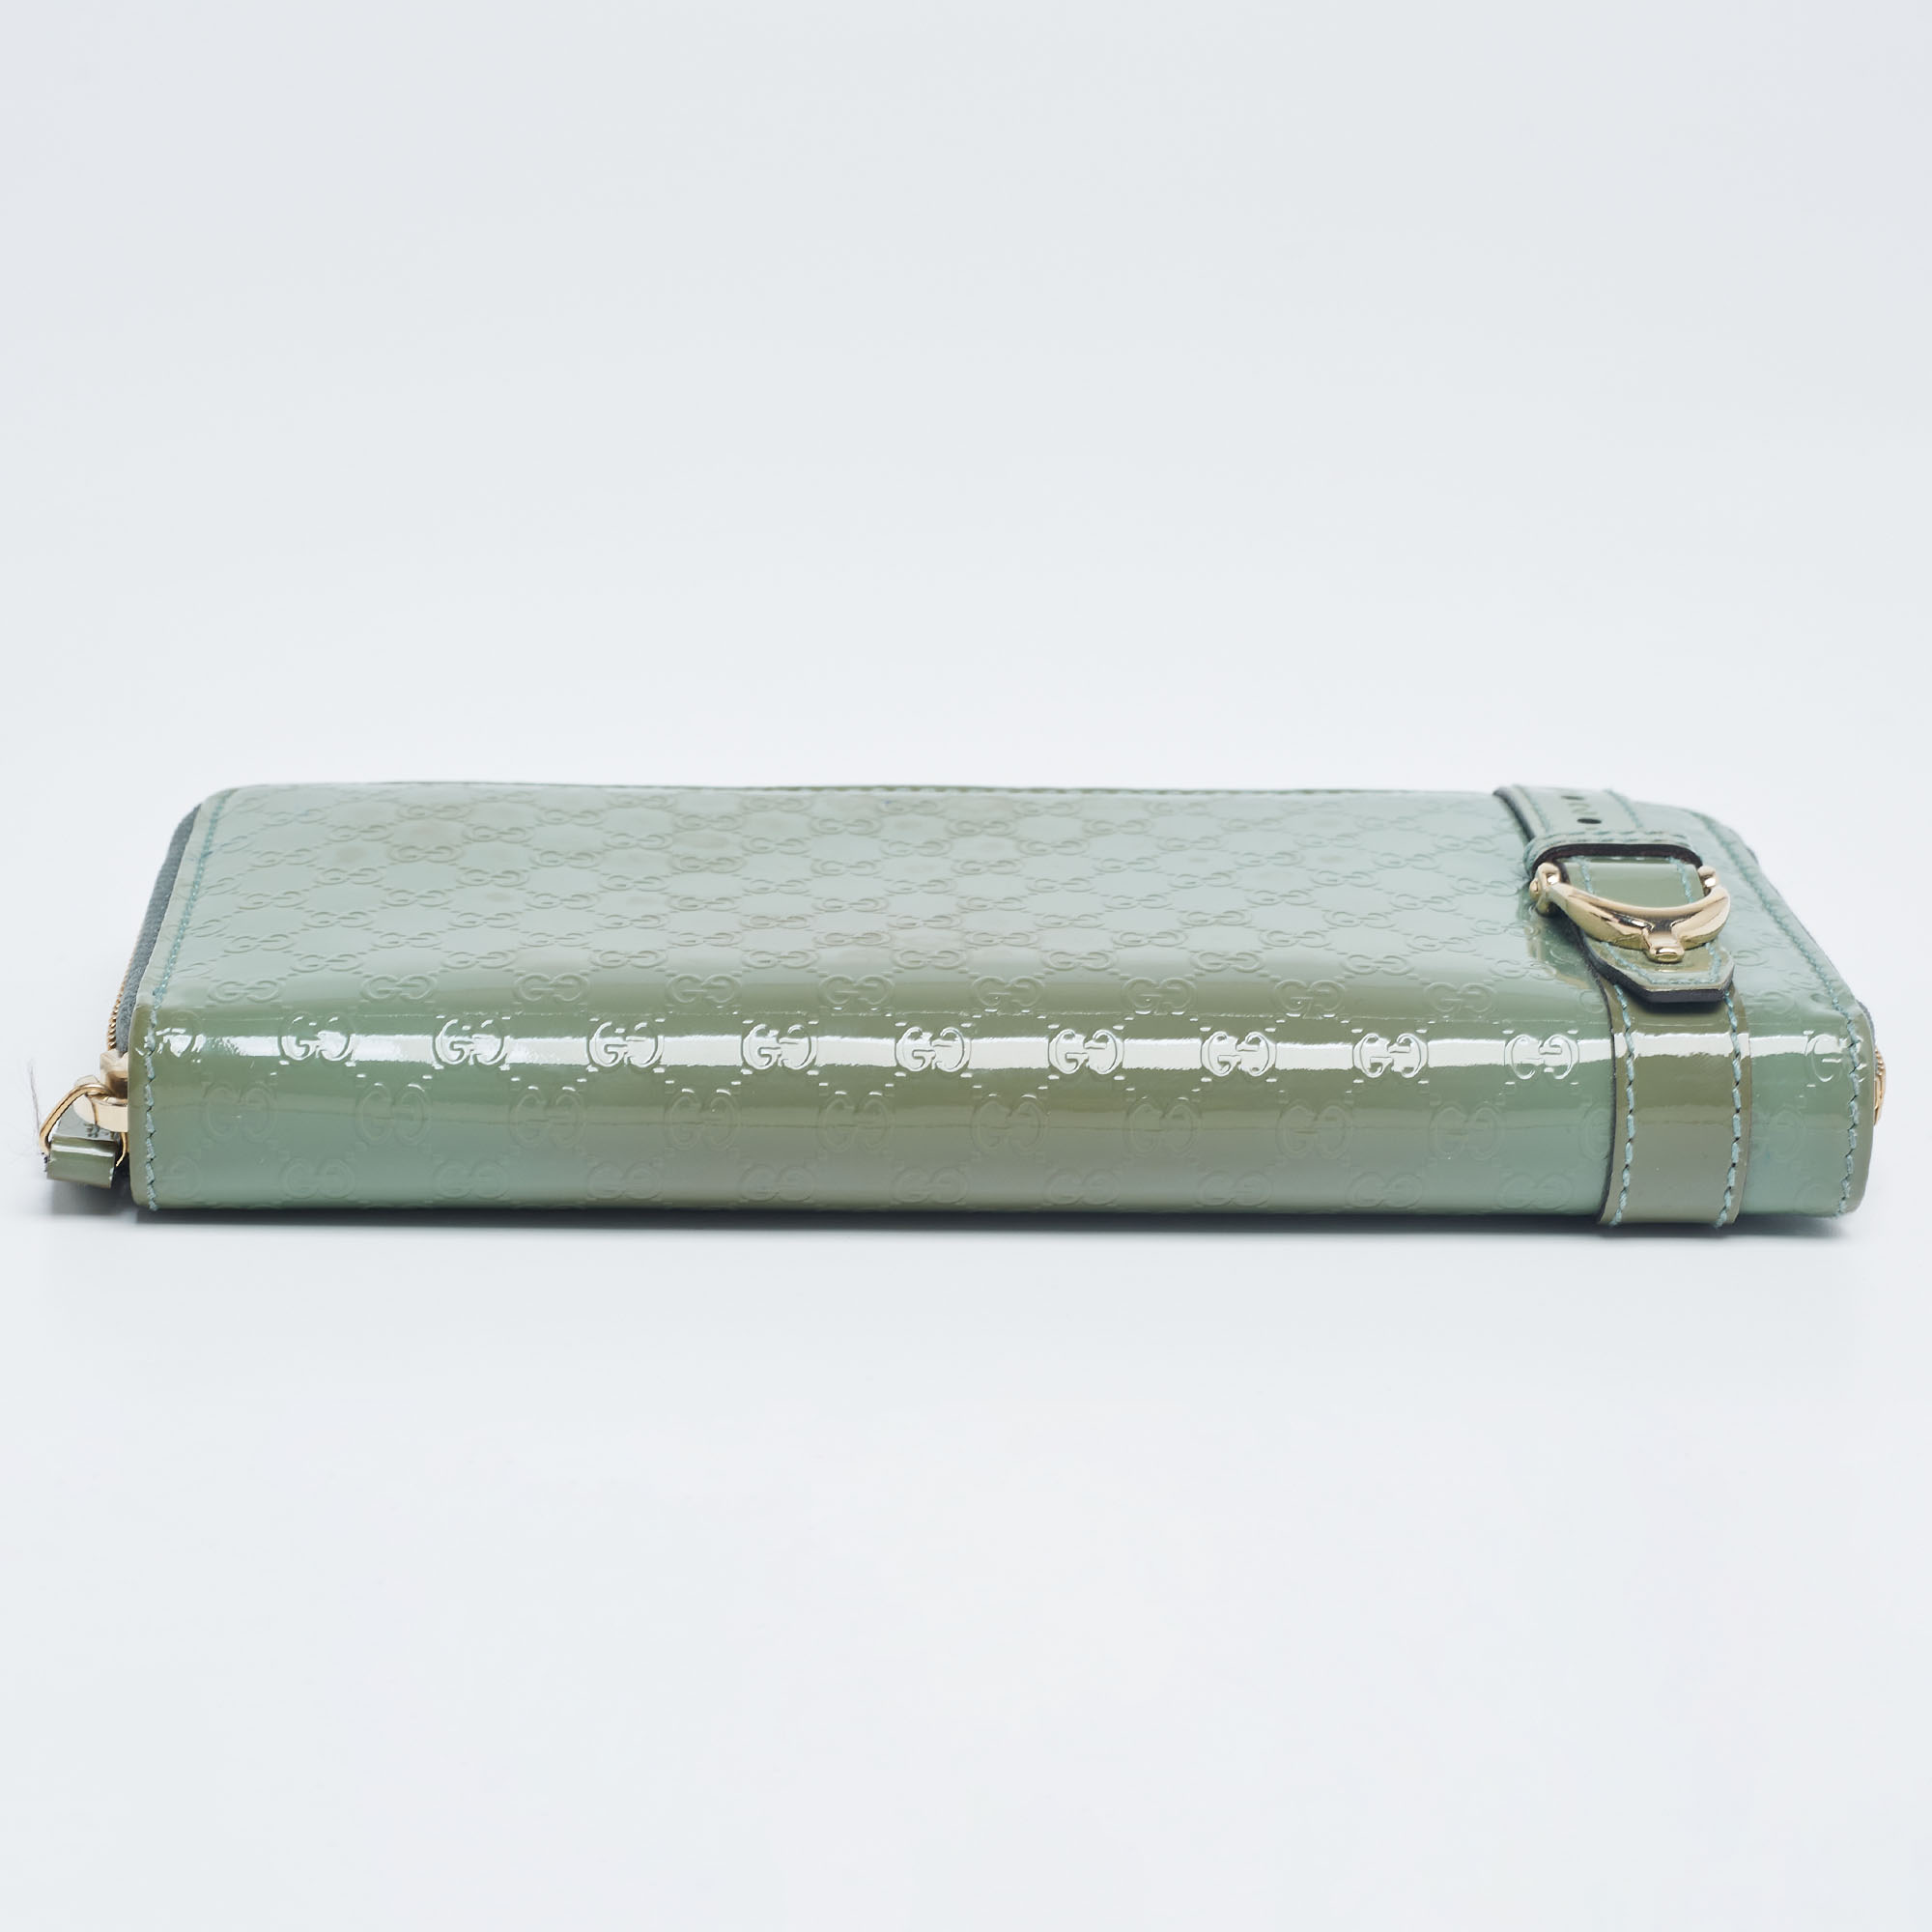 Gucci Green Microguccissima Patent Leather Zip Around Wallet